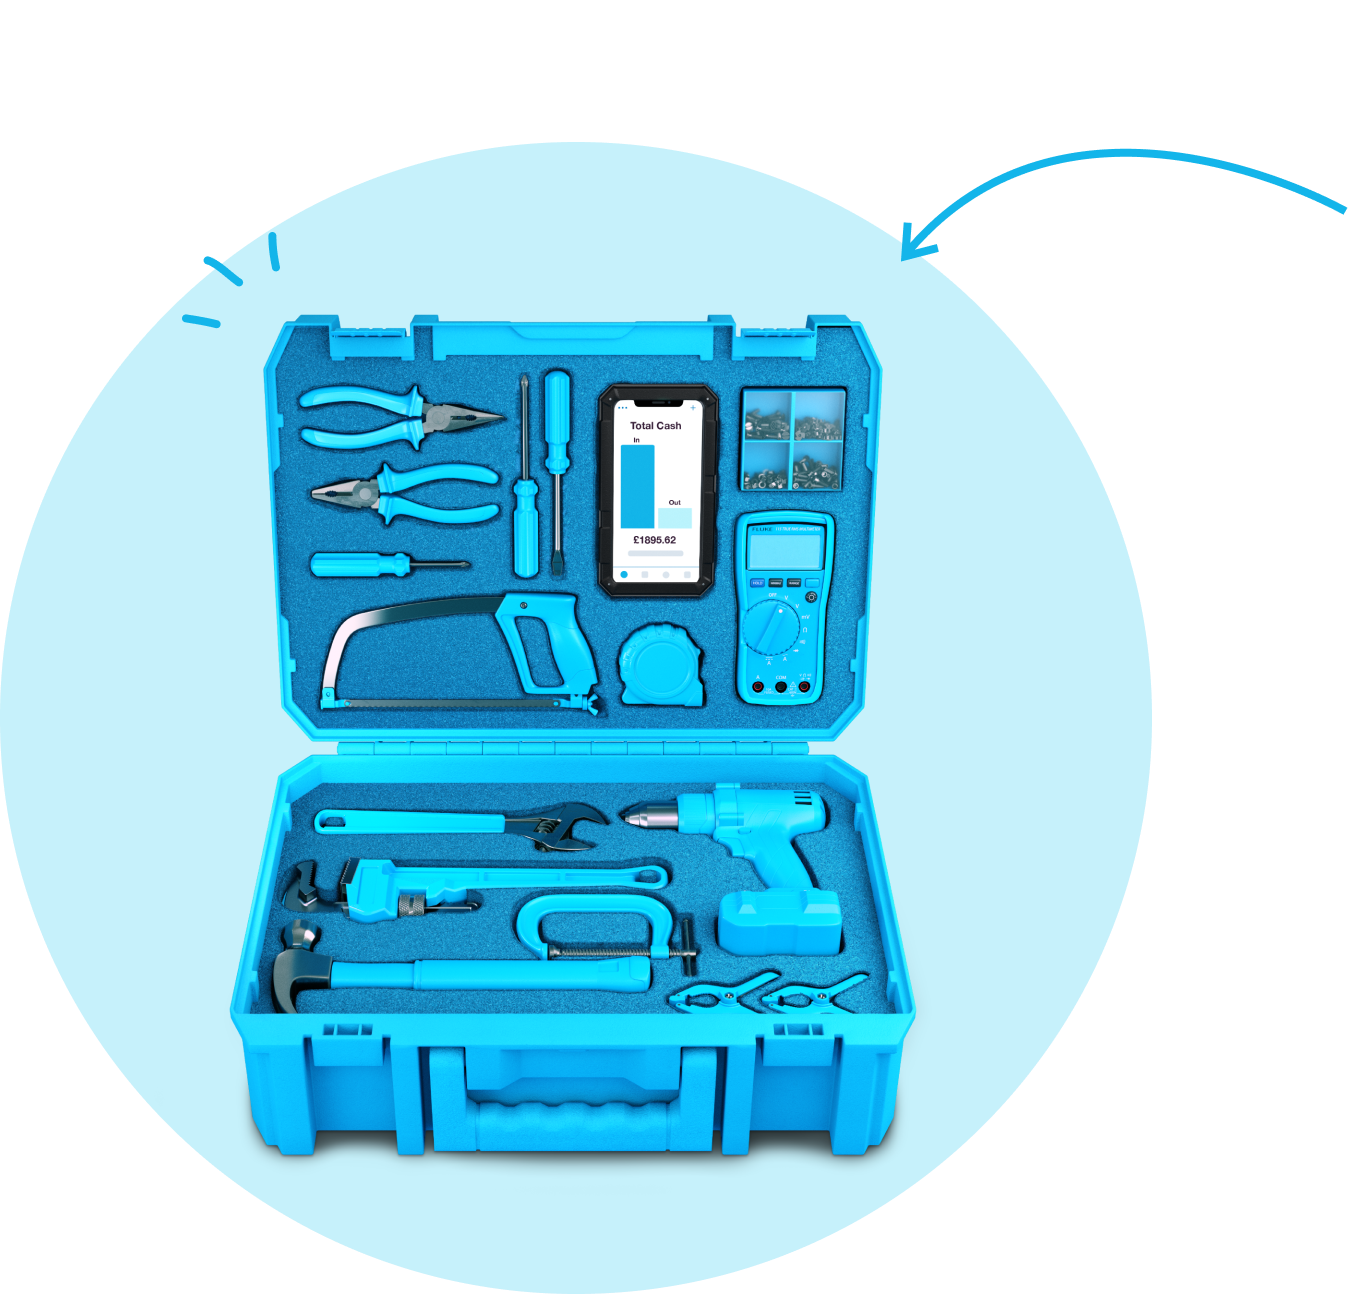 Toolbox filled with tools and a mobile phone with the Xero app open